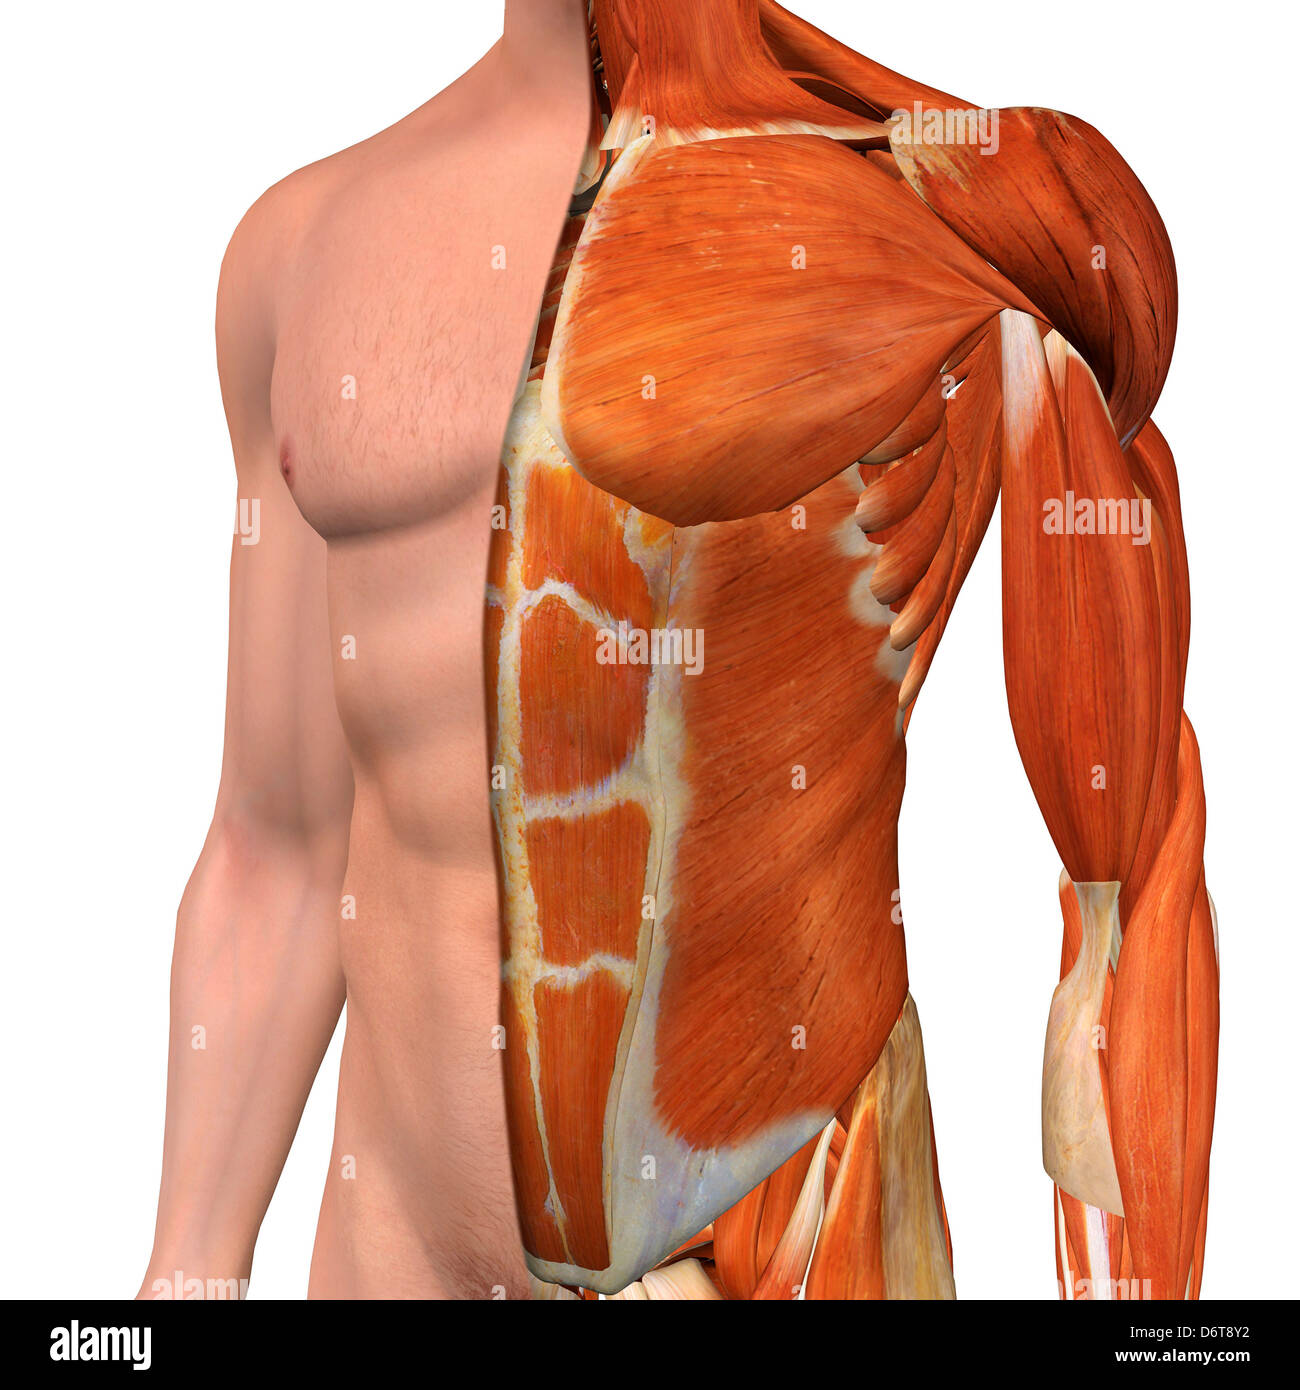 Chest Muscles Anatomy Anatomy Drawing Diagram